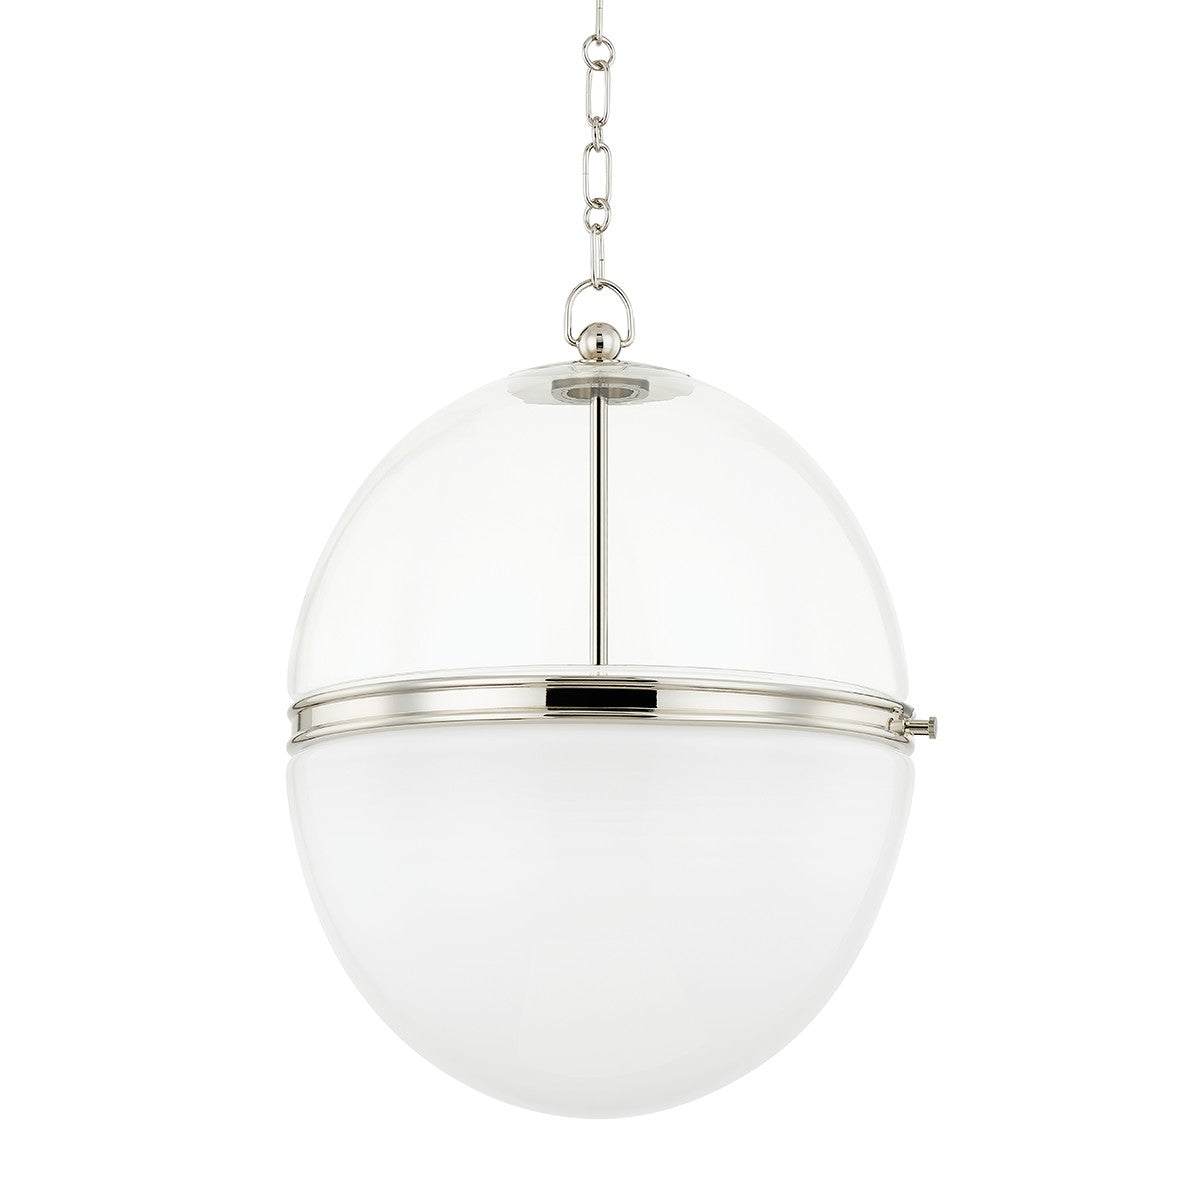 Hudson Valley - 3821-PN - One Light Pendant - Donnell - Polished Nickel